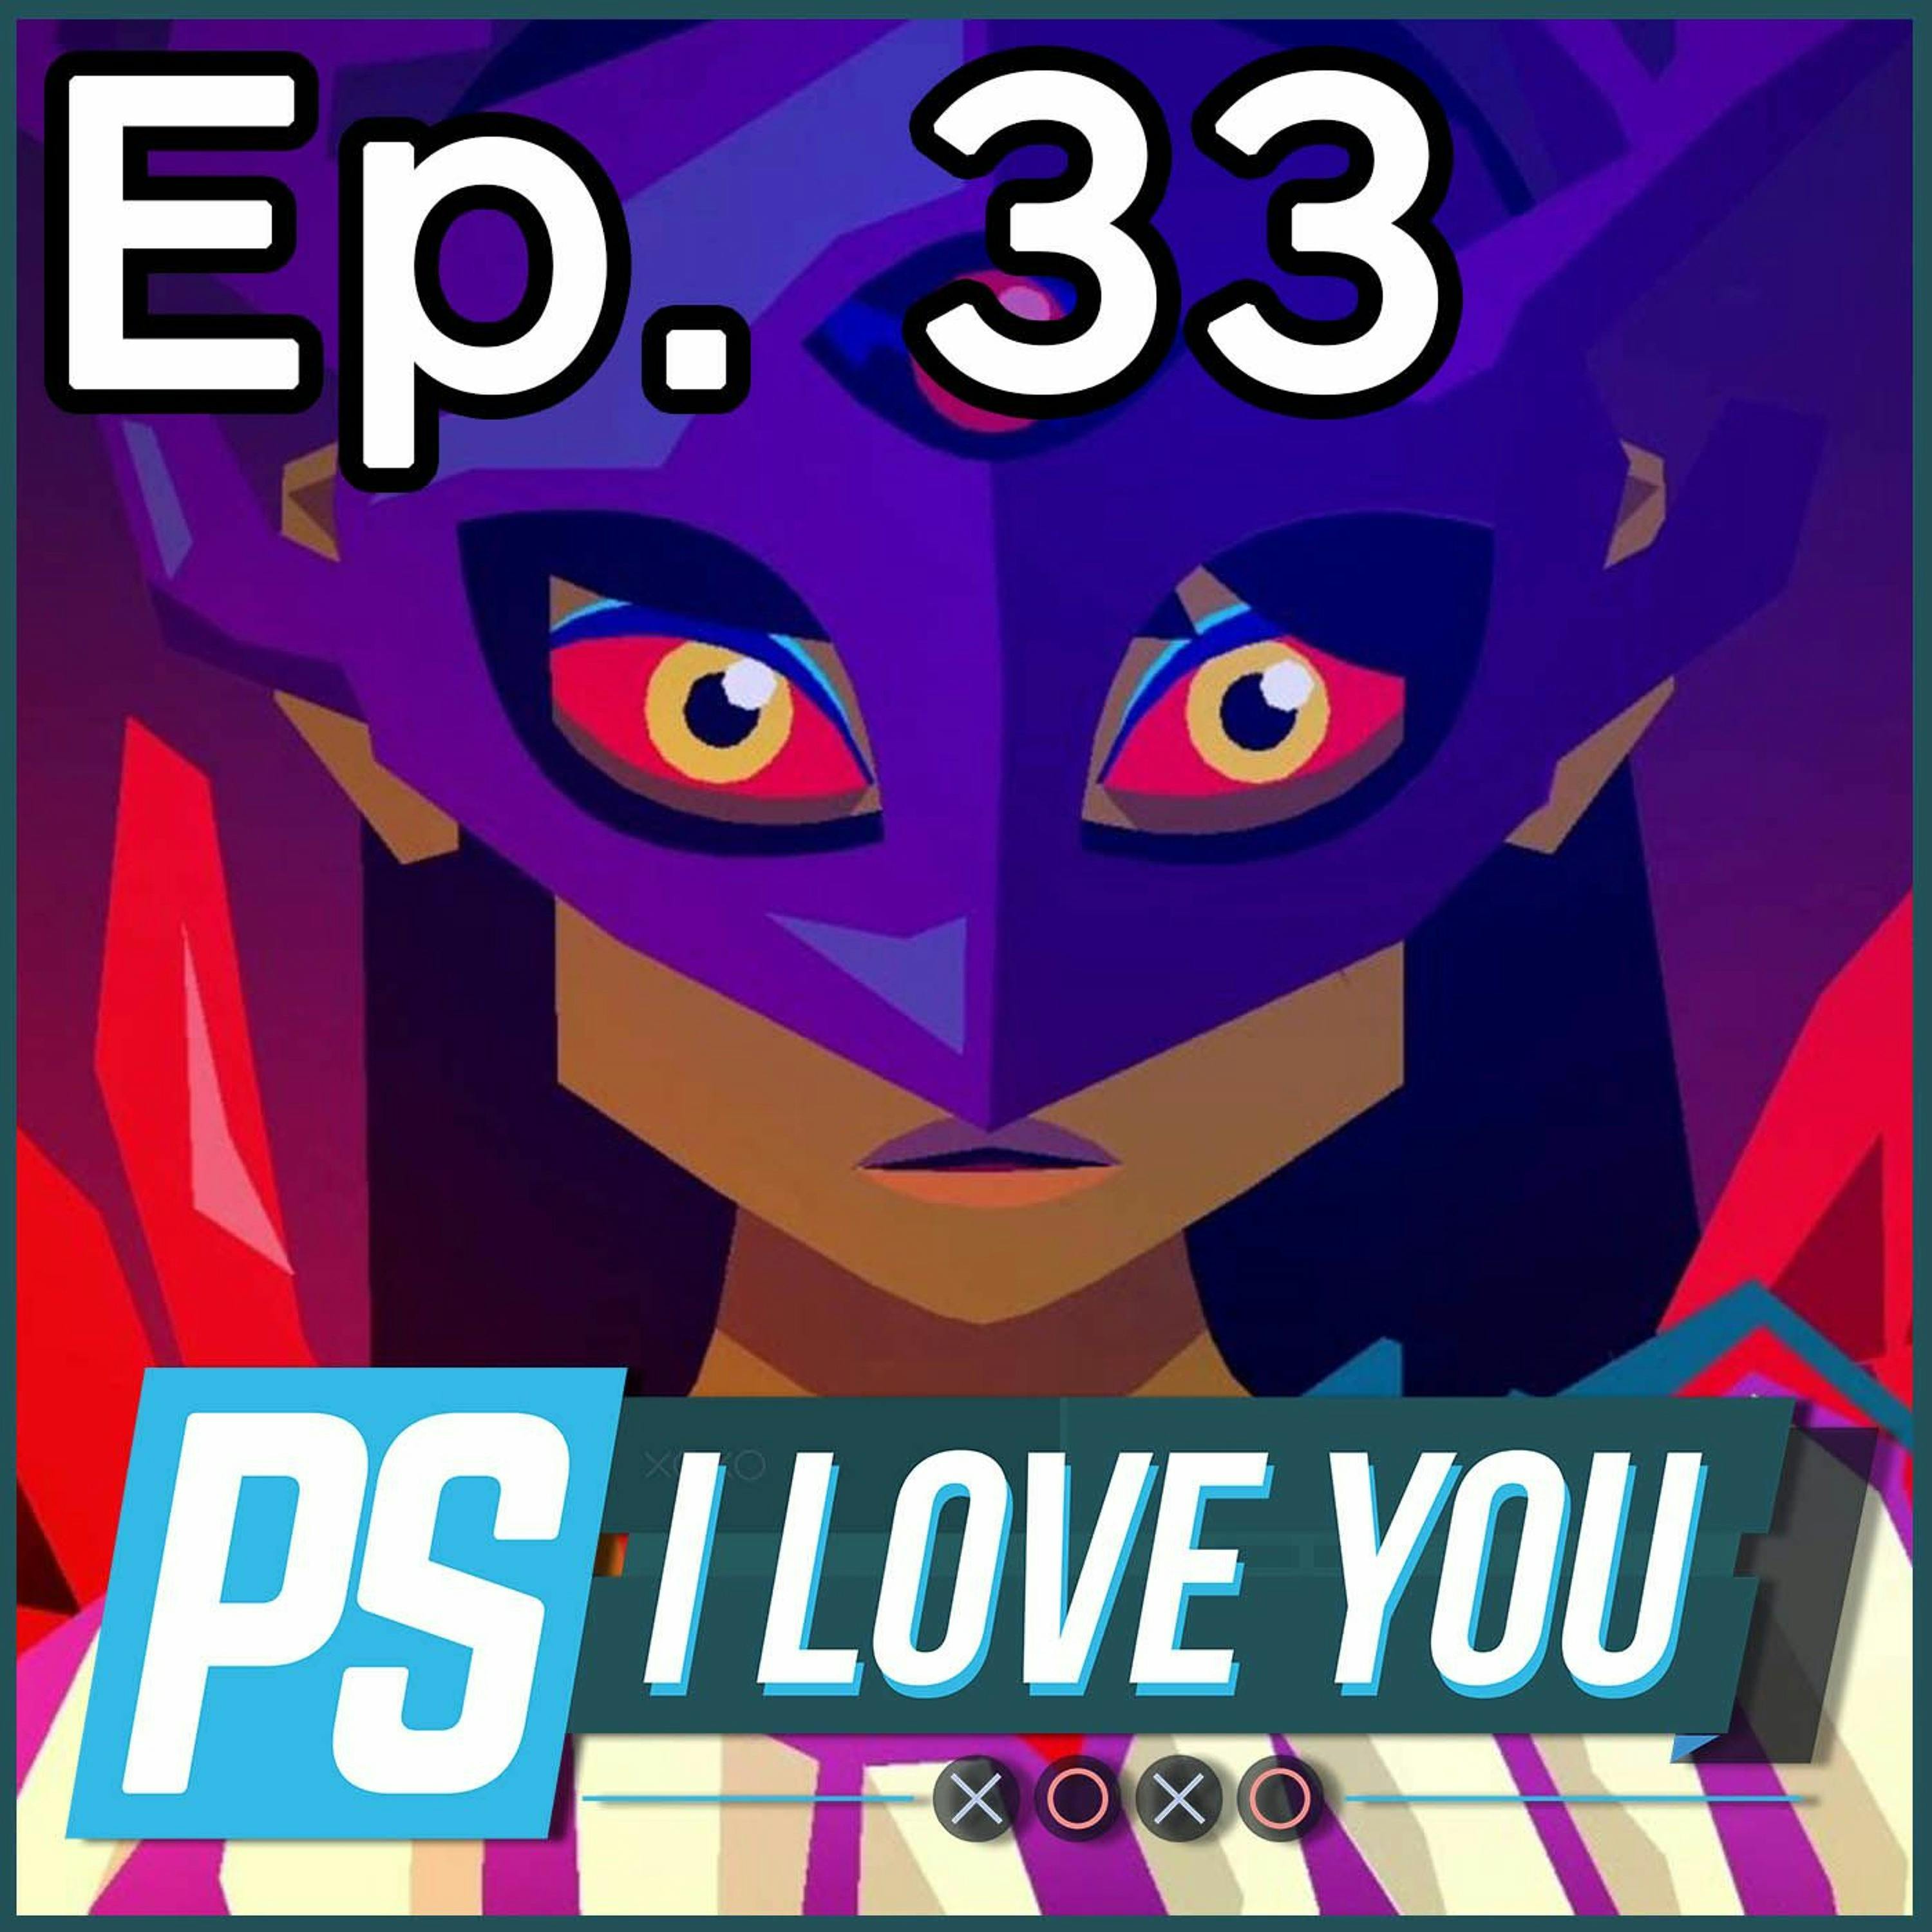 Severed Review - PS I Love You XOXO Ep. 33